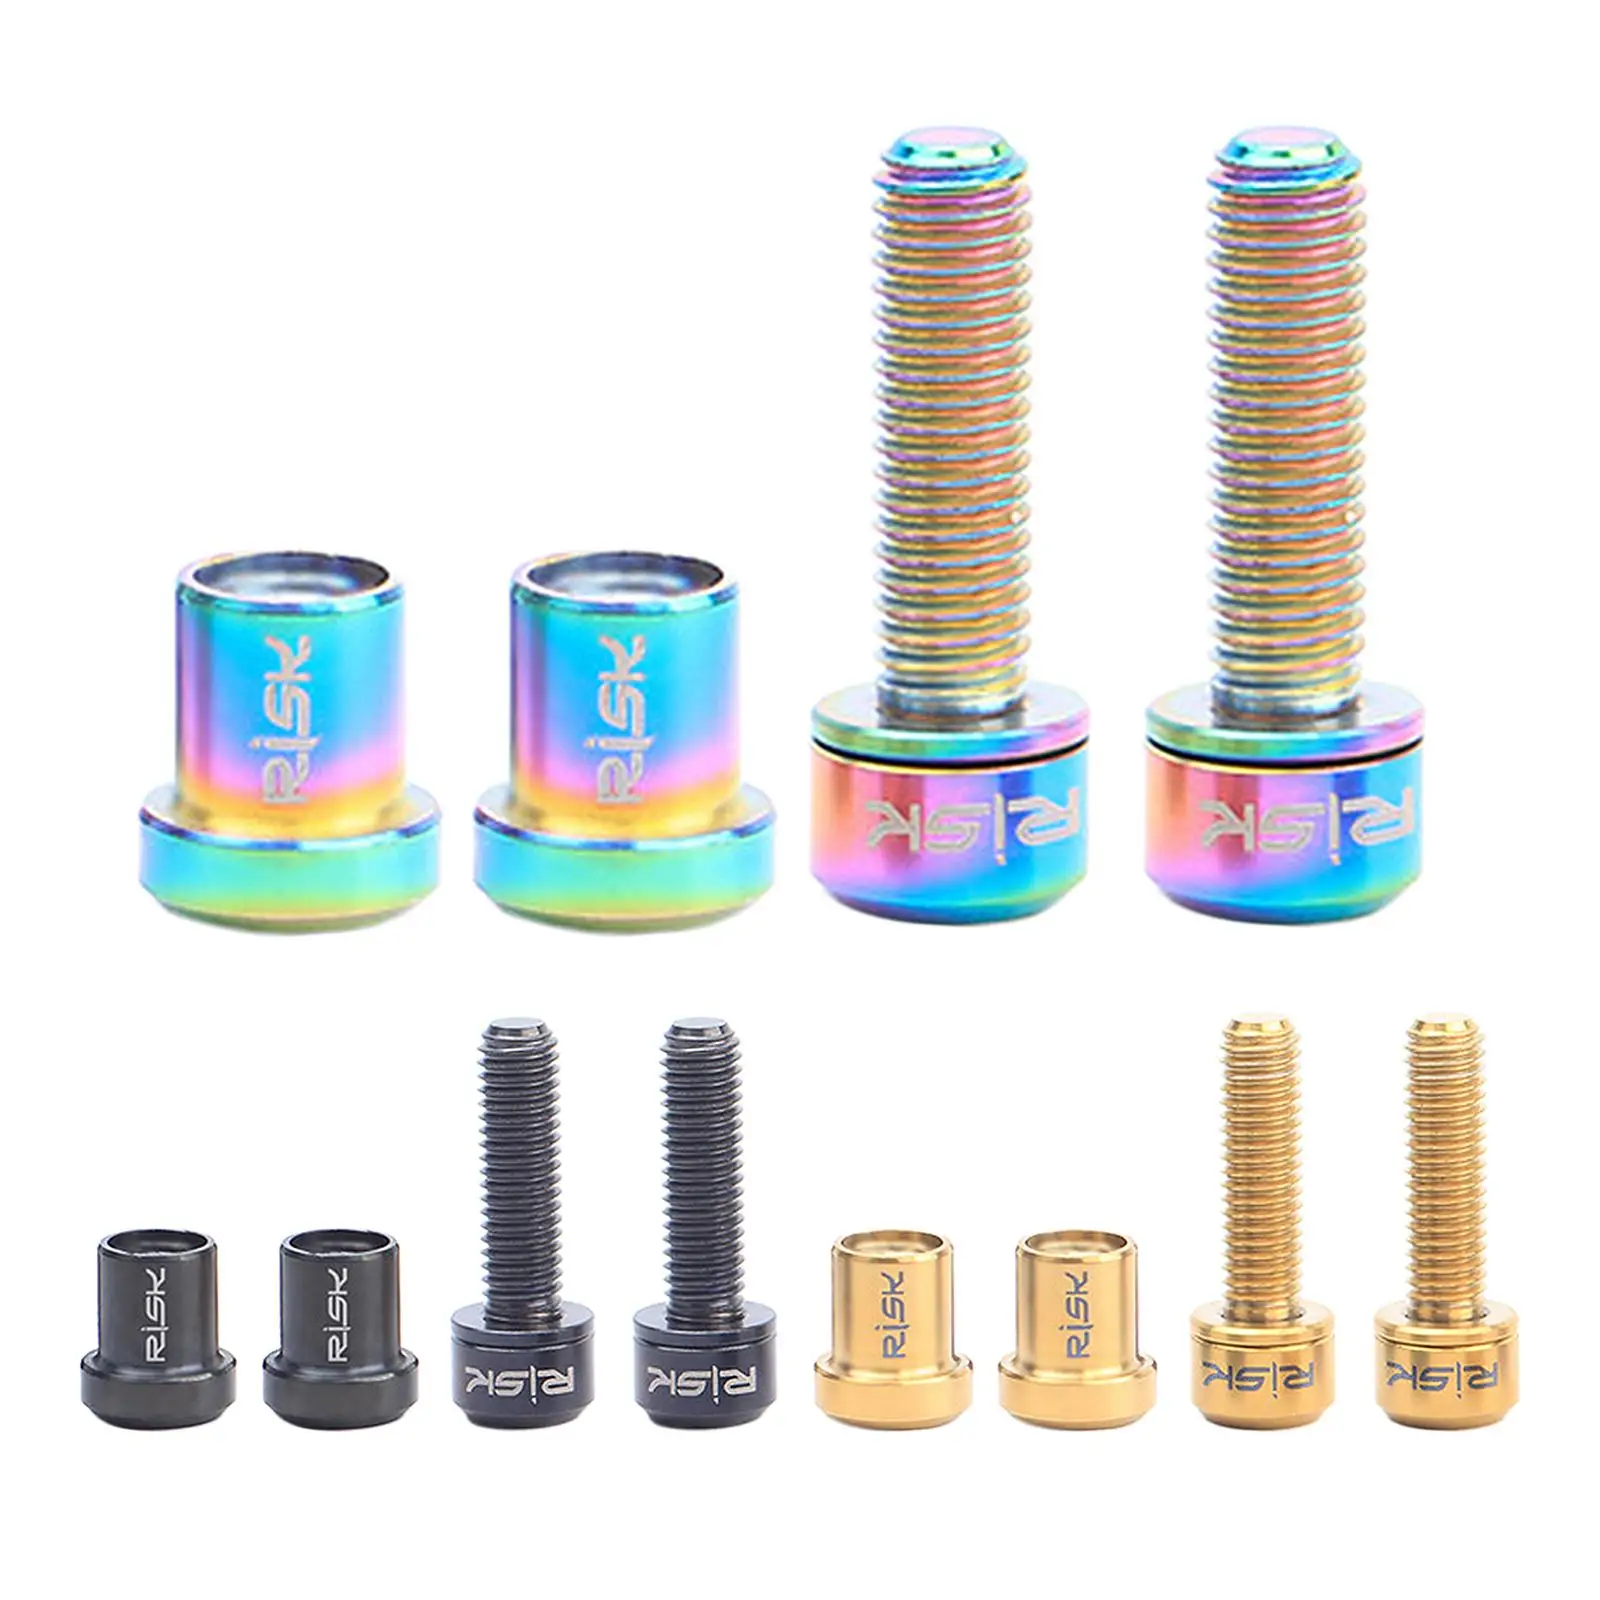 Durable Bike Stem Bolts Nuts Kit Bicycle Screw Bolts for MTB Repairing Parts